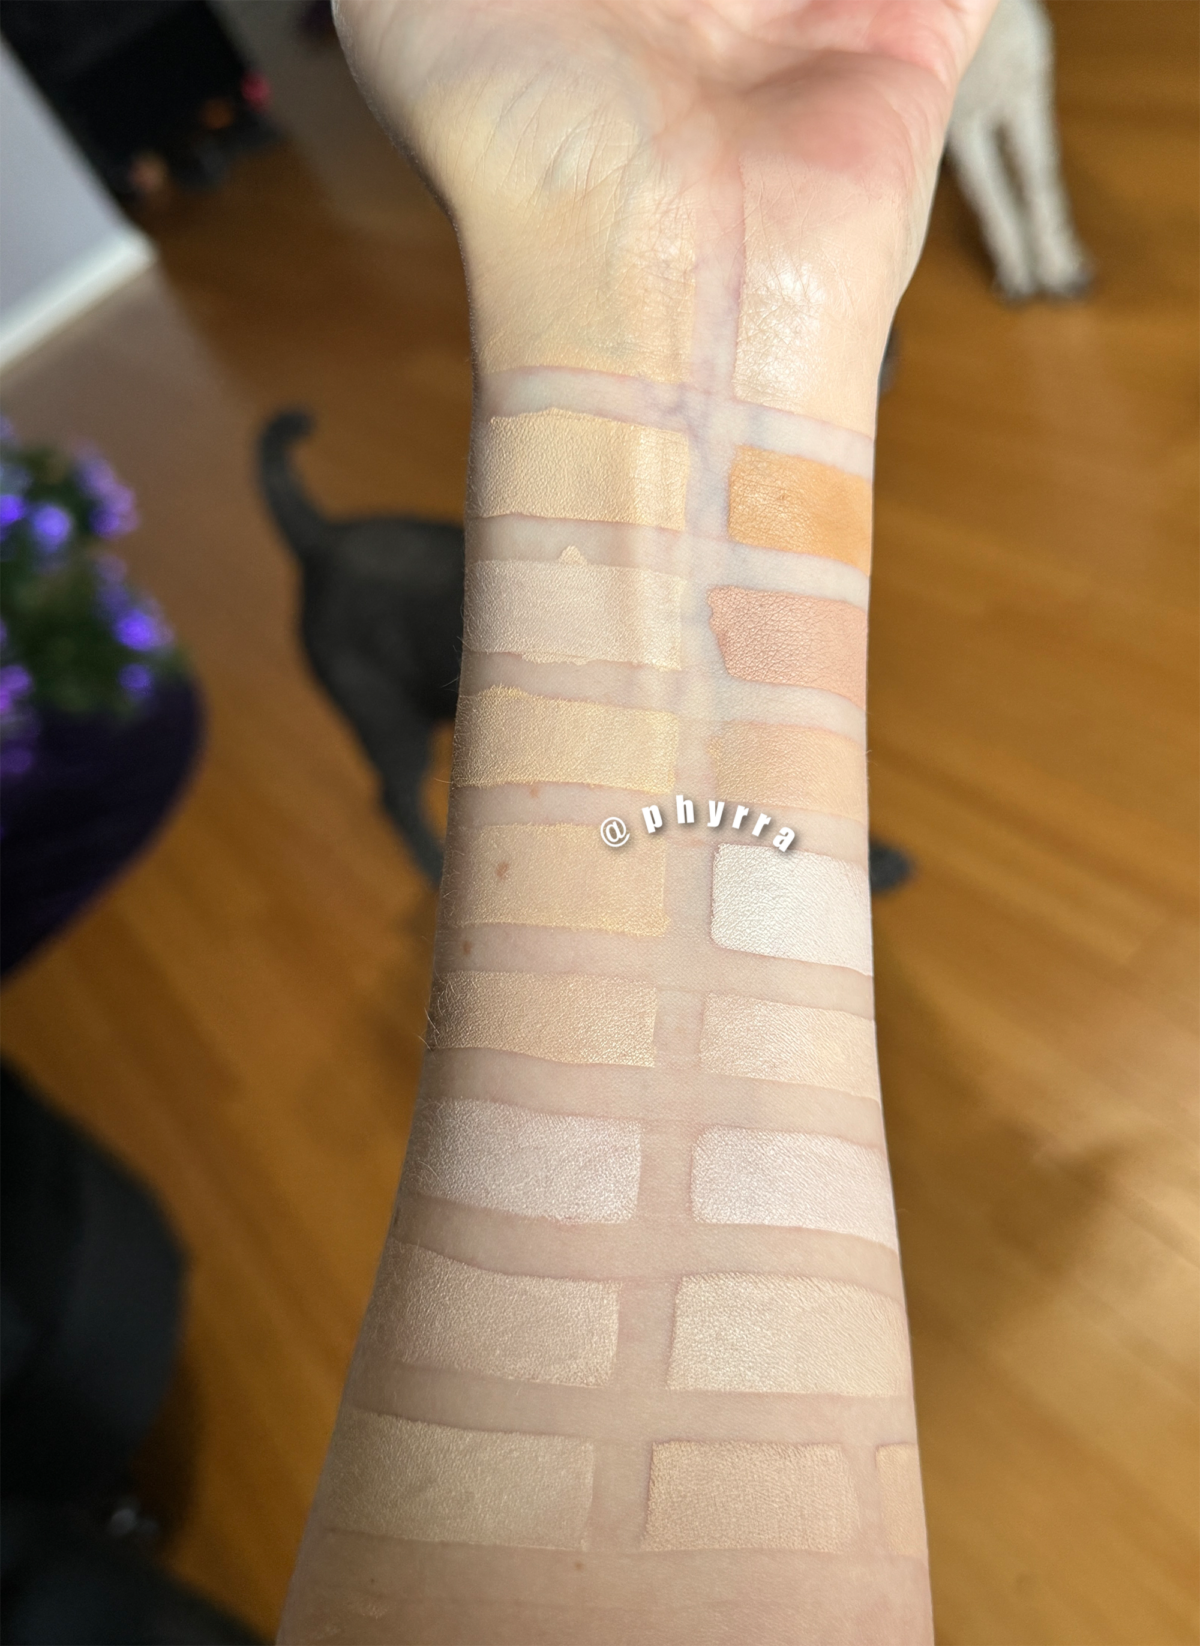 Foundation Swatches on Fair Skin in fair and light depths